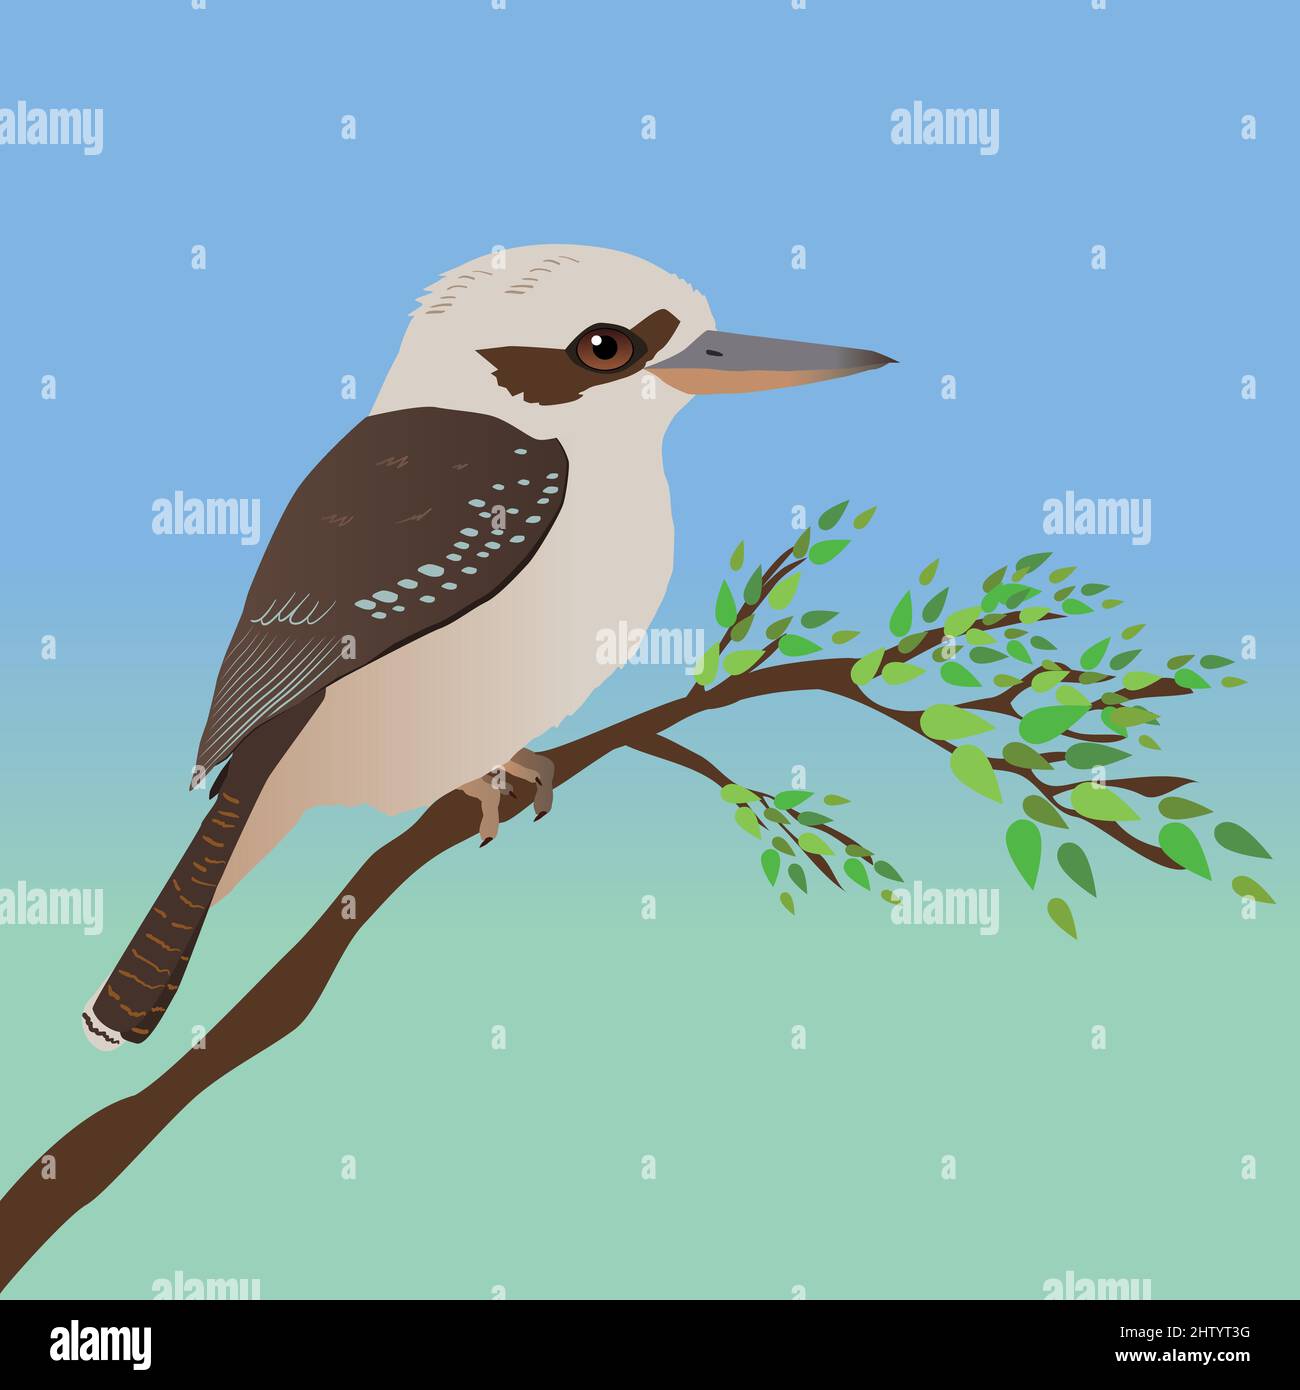 A vector illustration of a kookaburra. The bird is perched on a branch with some leafs. The background is a blue and green gradient. Stock Vector